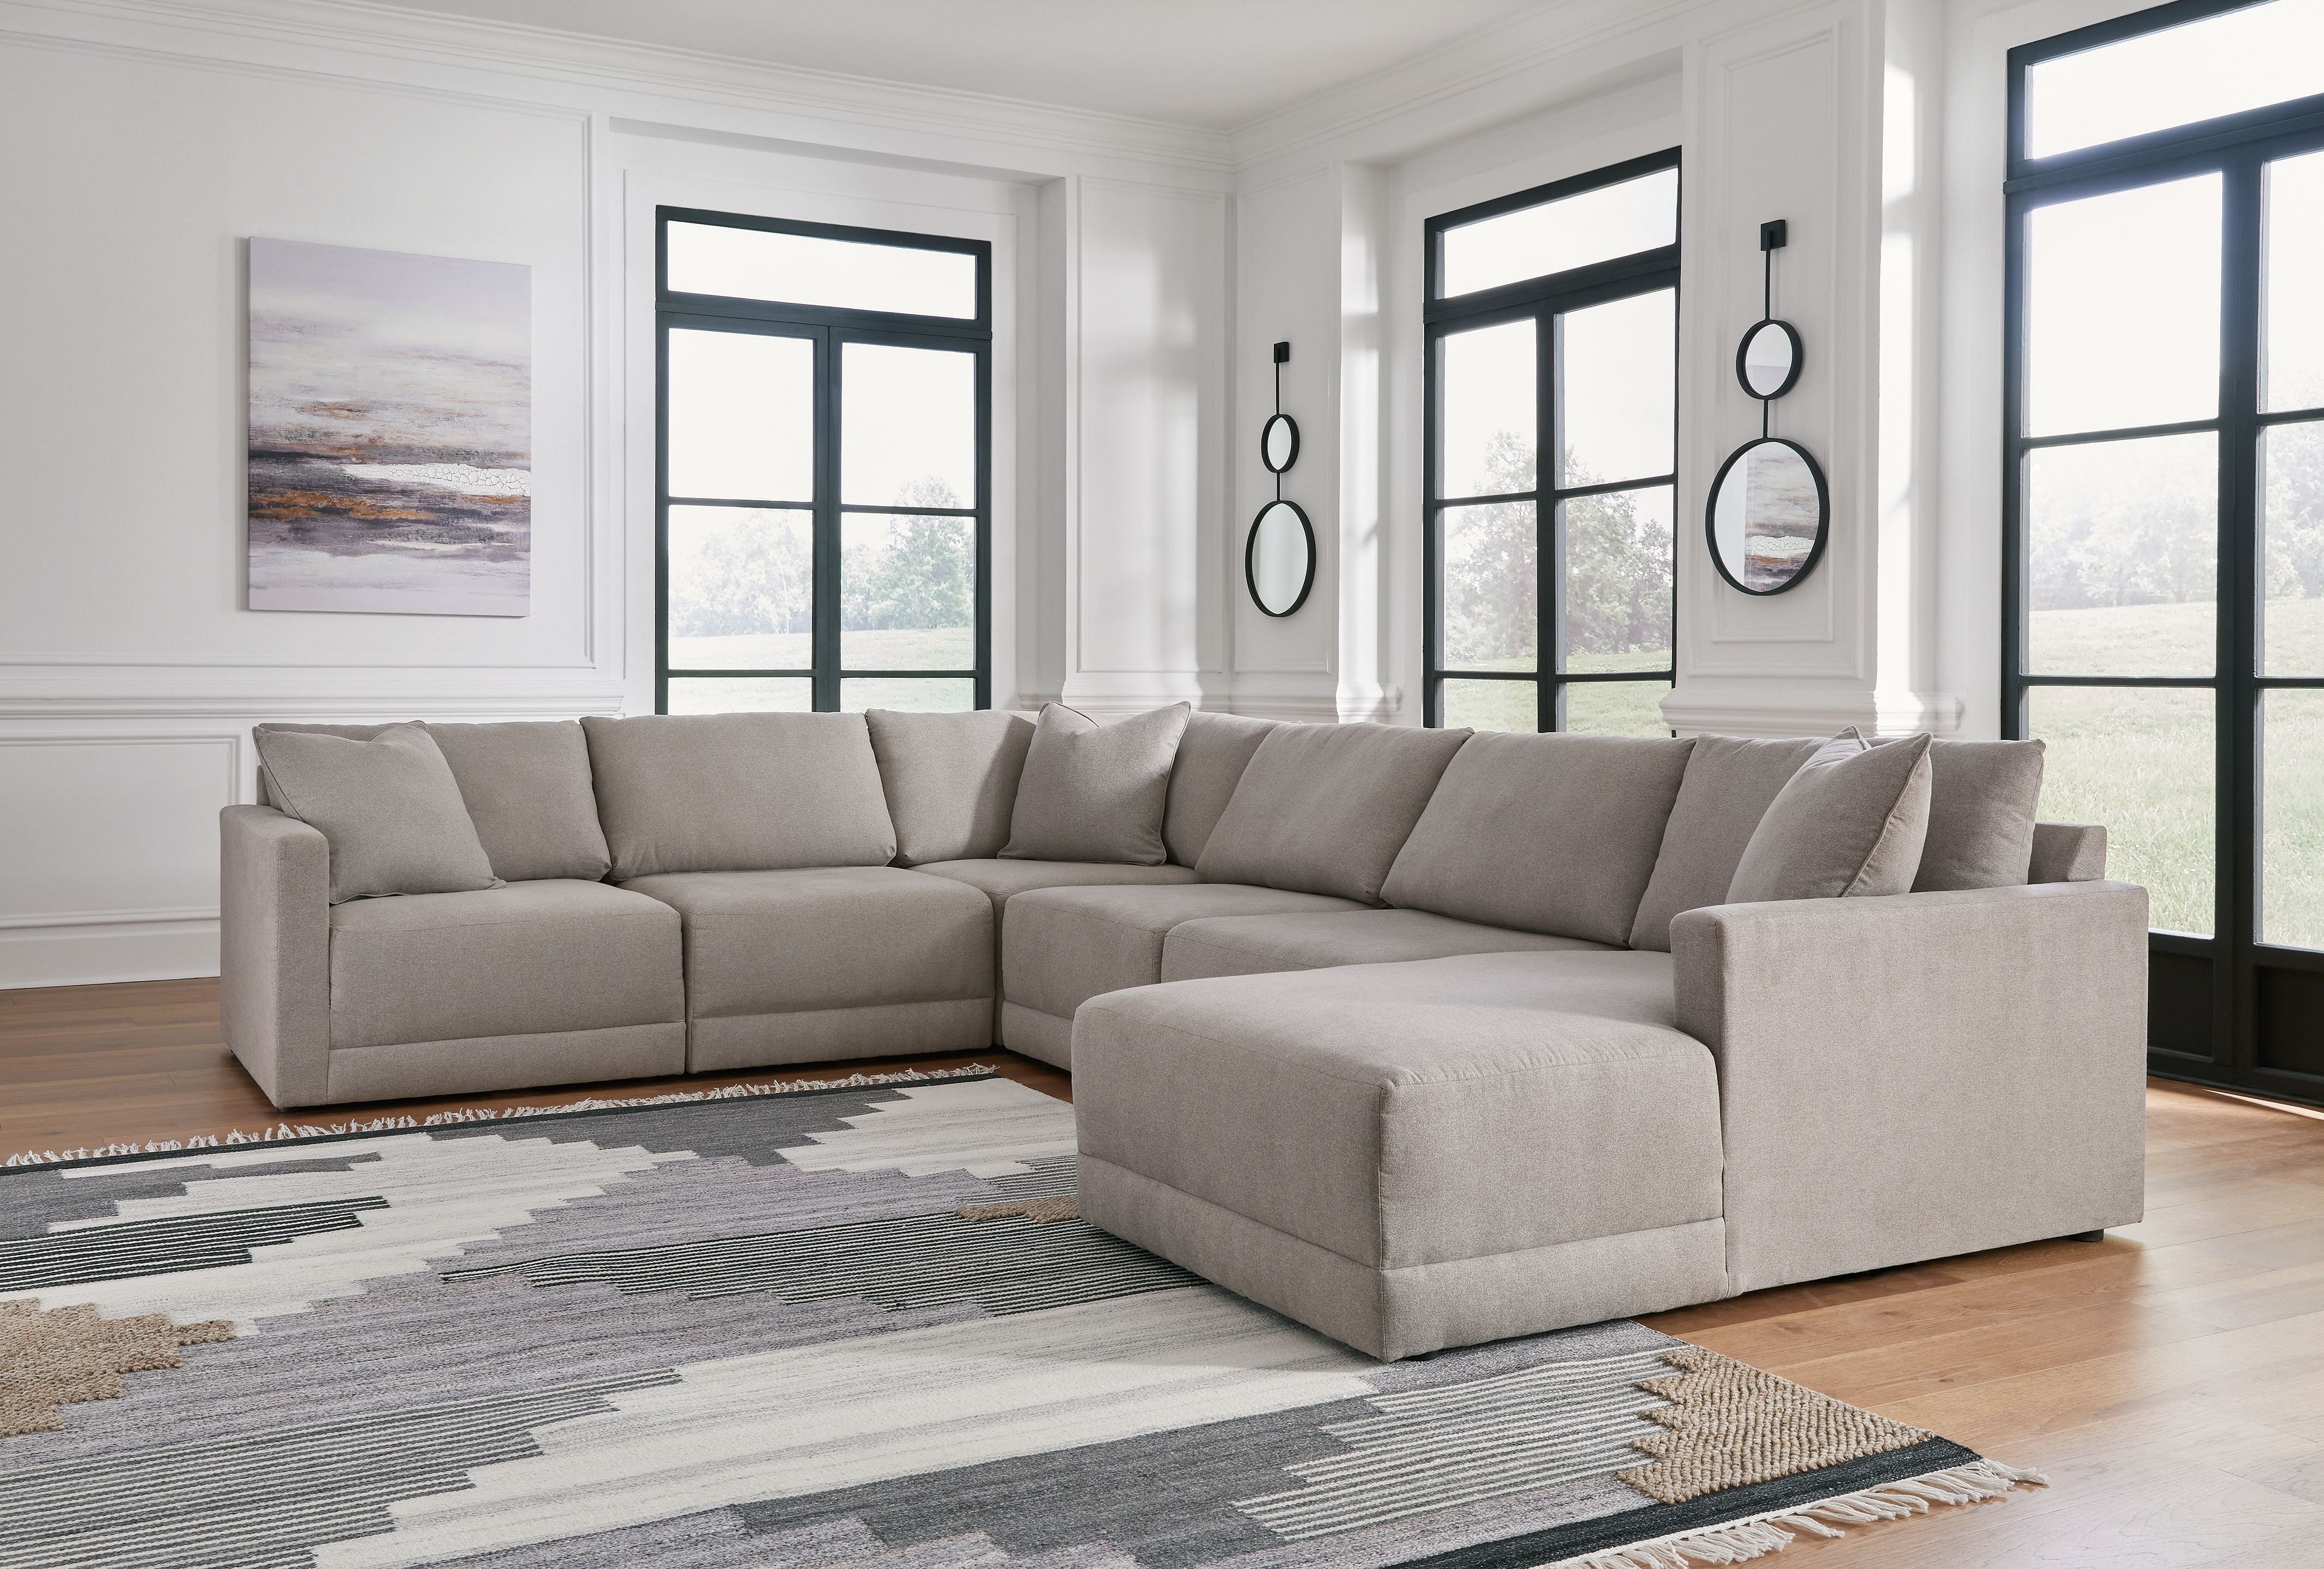 Living Room Sectionals Ashley Sectional With Ottoman 22201 64 46 3 77 17 08 At Istyle Furniture